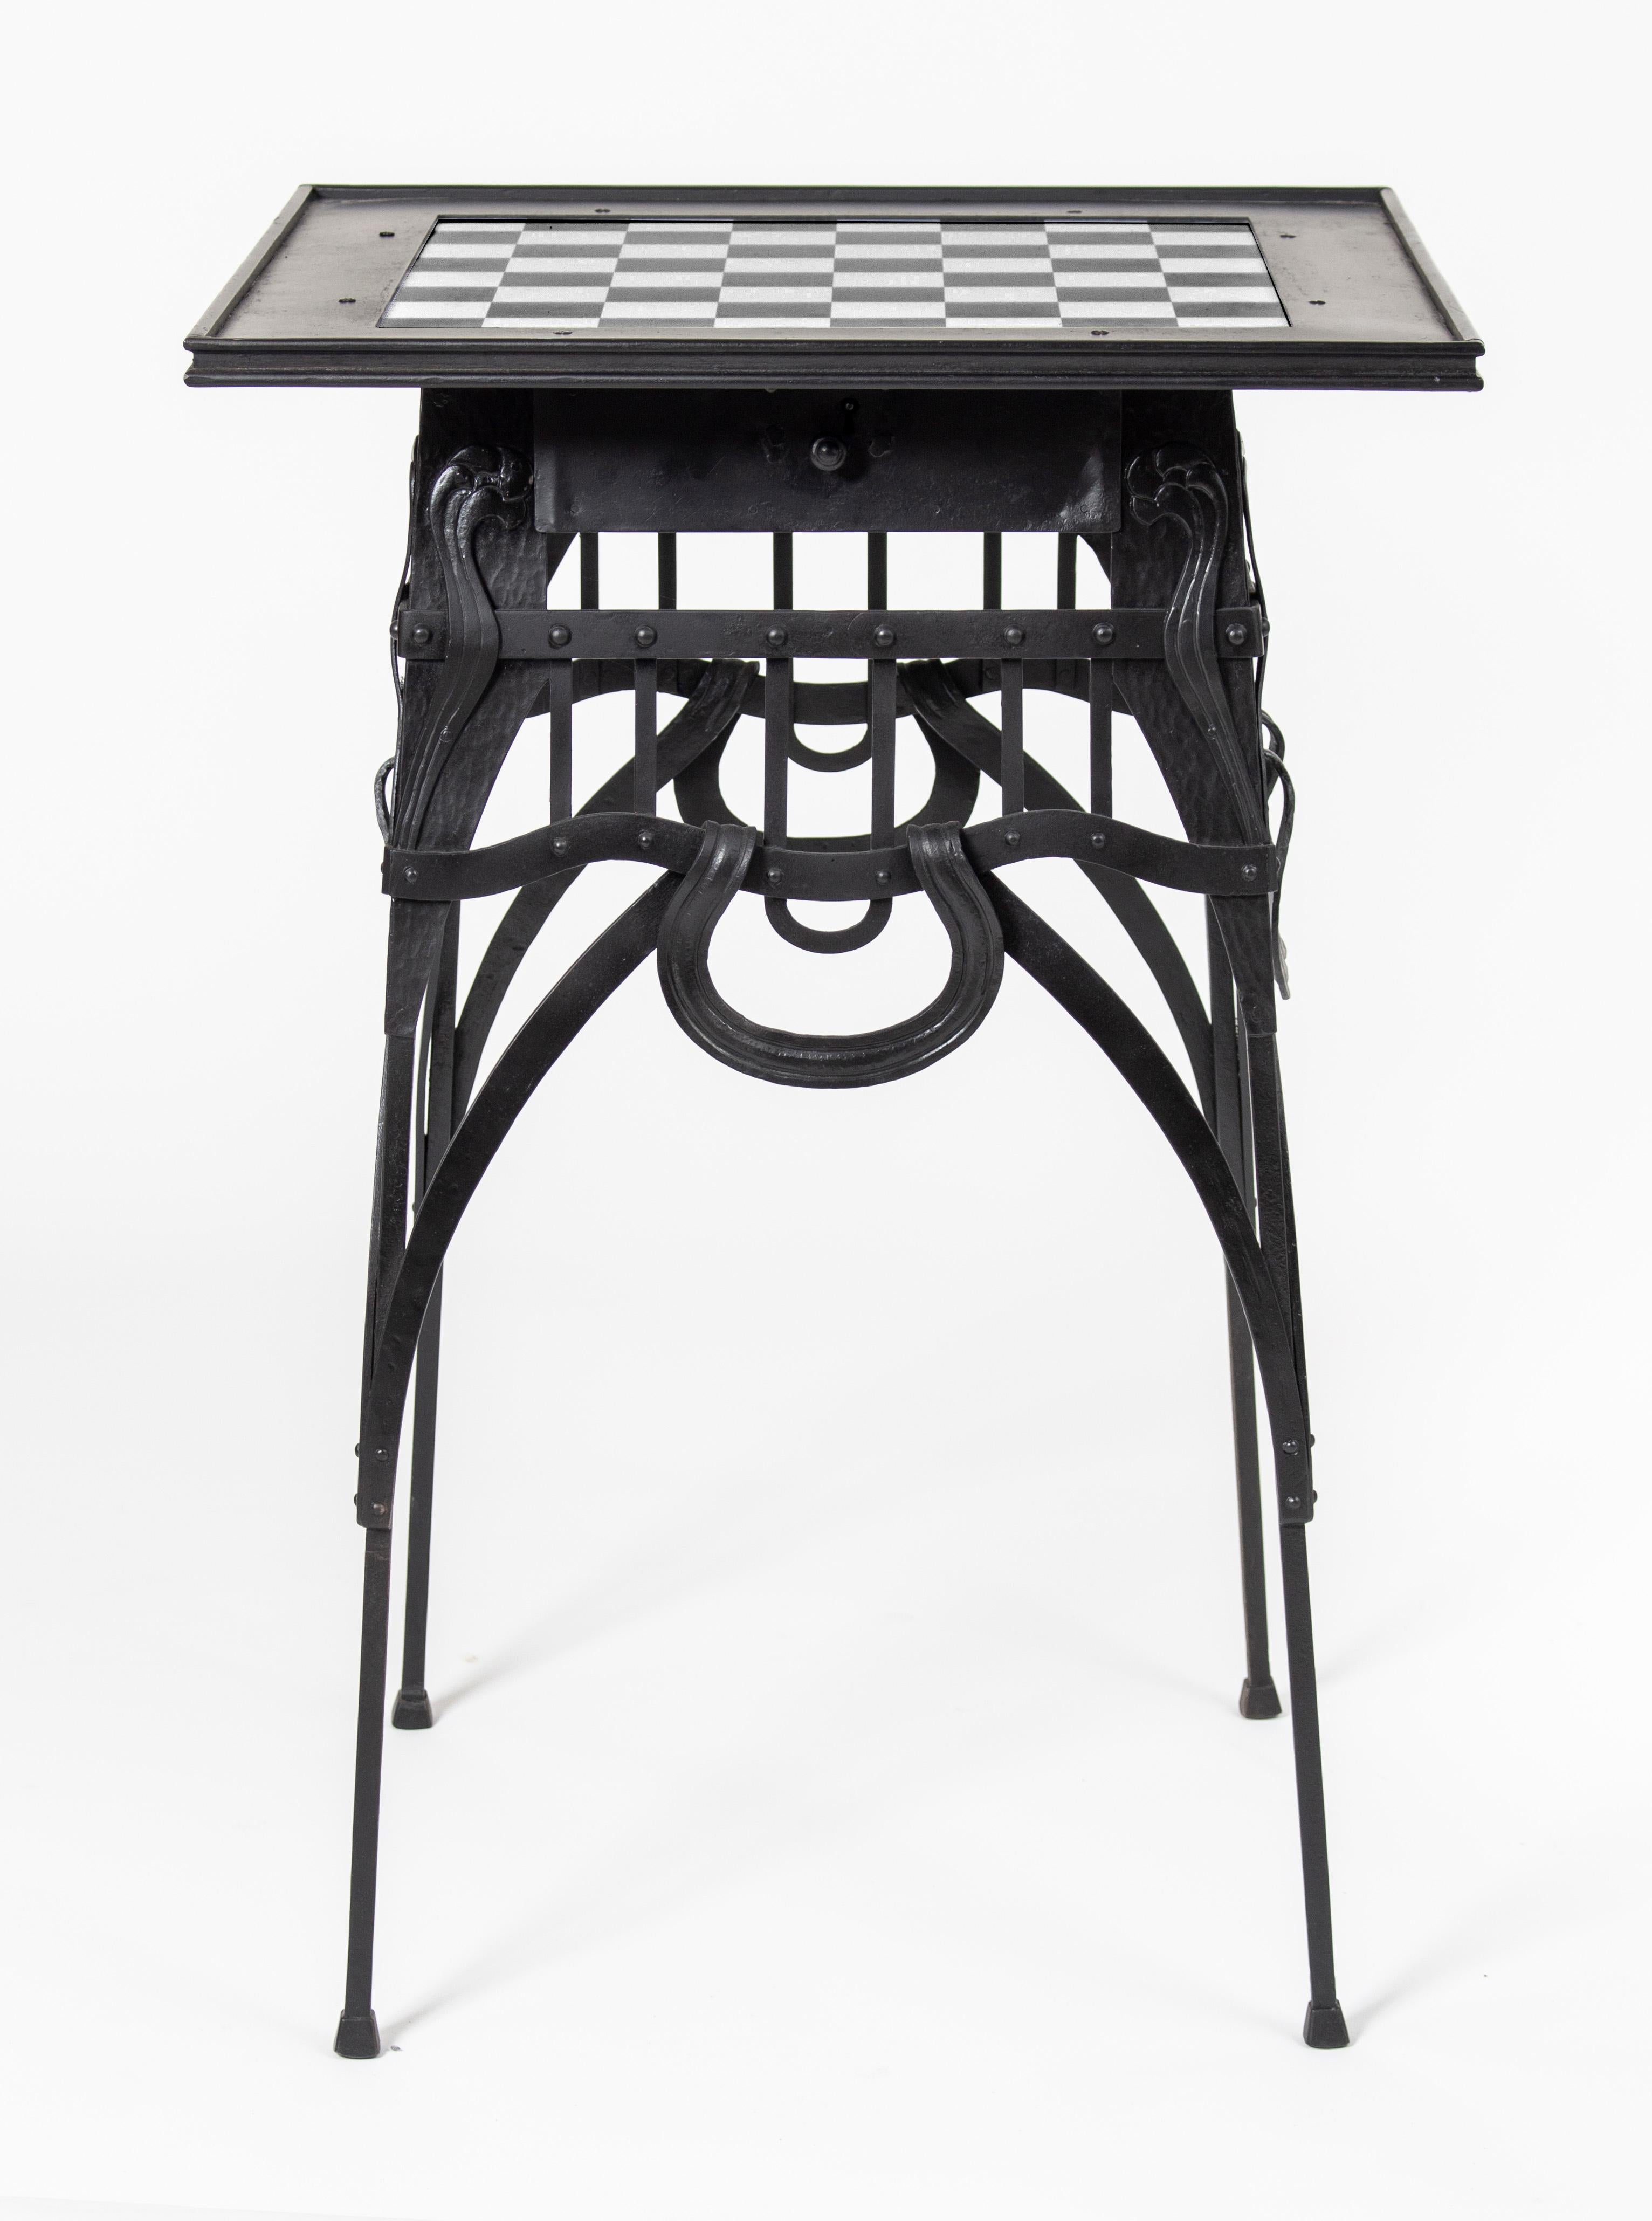 Art Nouveau wrought iron chess table created by János Sárváry, Hungarian wrought iron master.
János Sárváry (1867 - 1937) was a very famous manufacturer and designer in Budapest at the time. He represented the Hungarian artisanship on the Paris